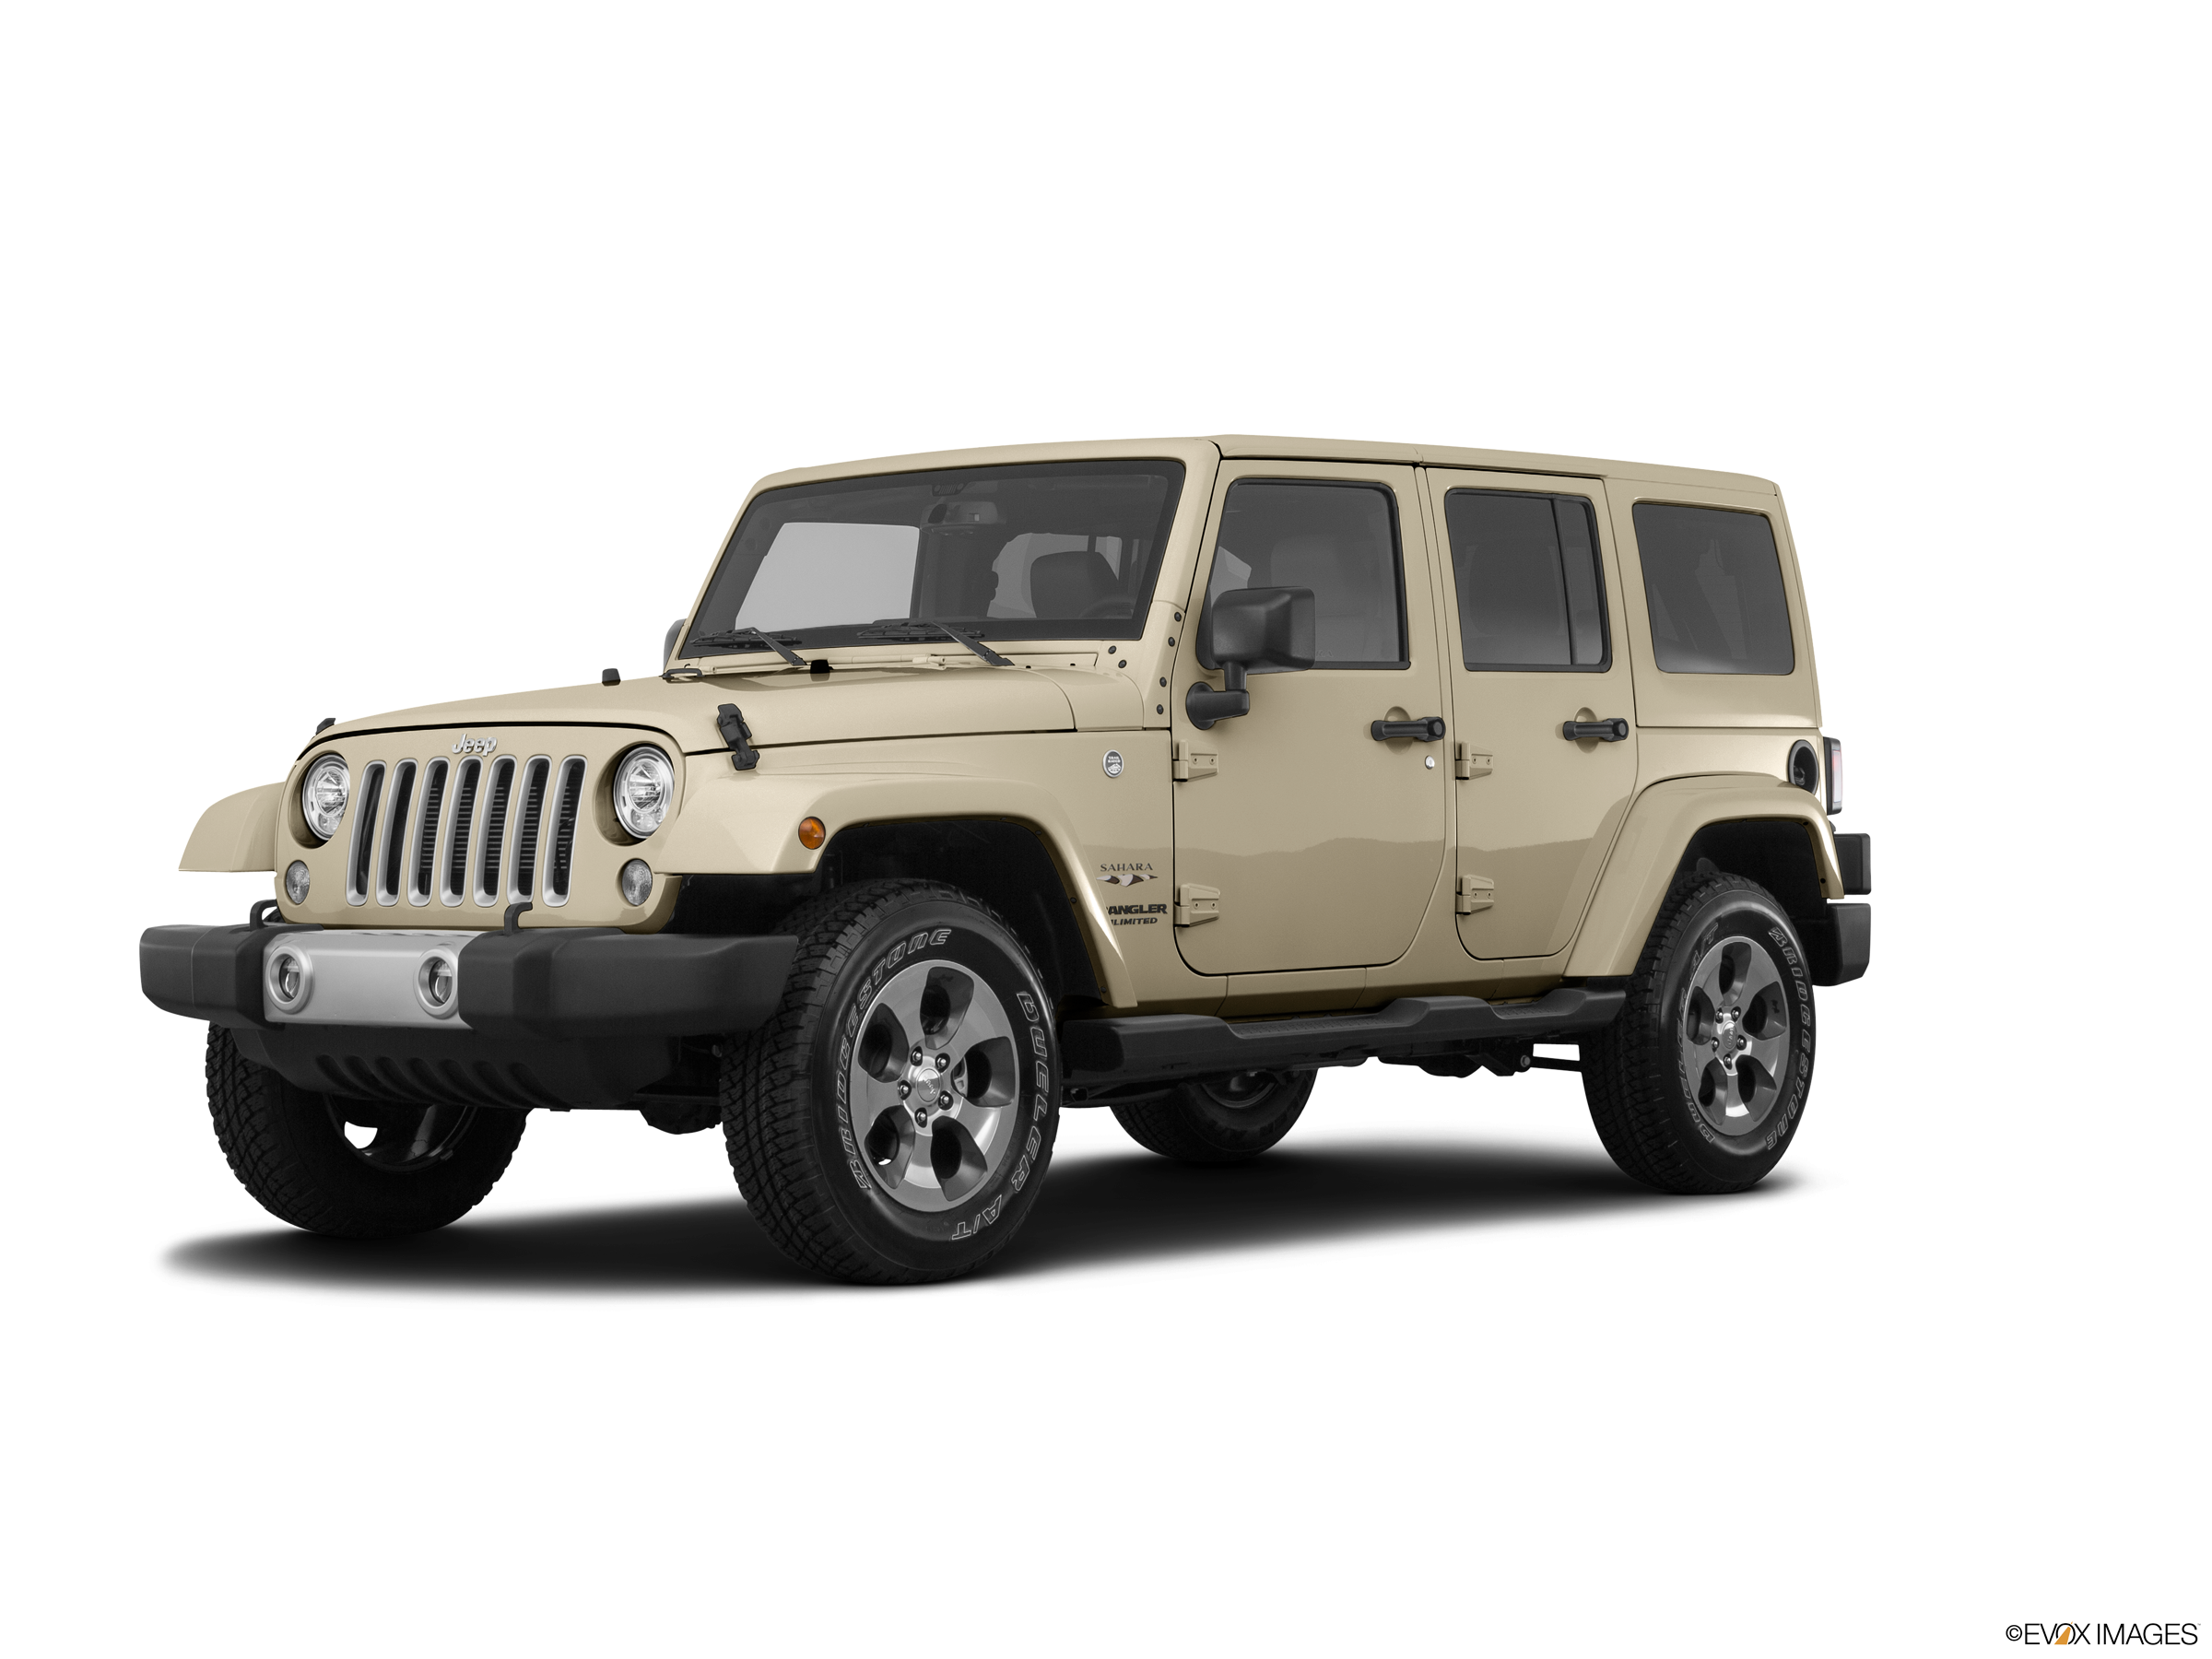 2018 Jeep Wrangler Unlimited Values & Cars for Sale | Kelley Blue Book